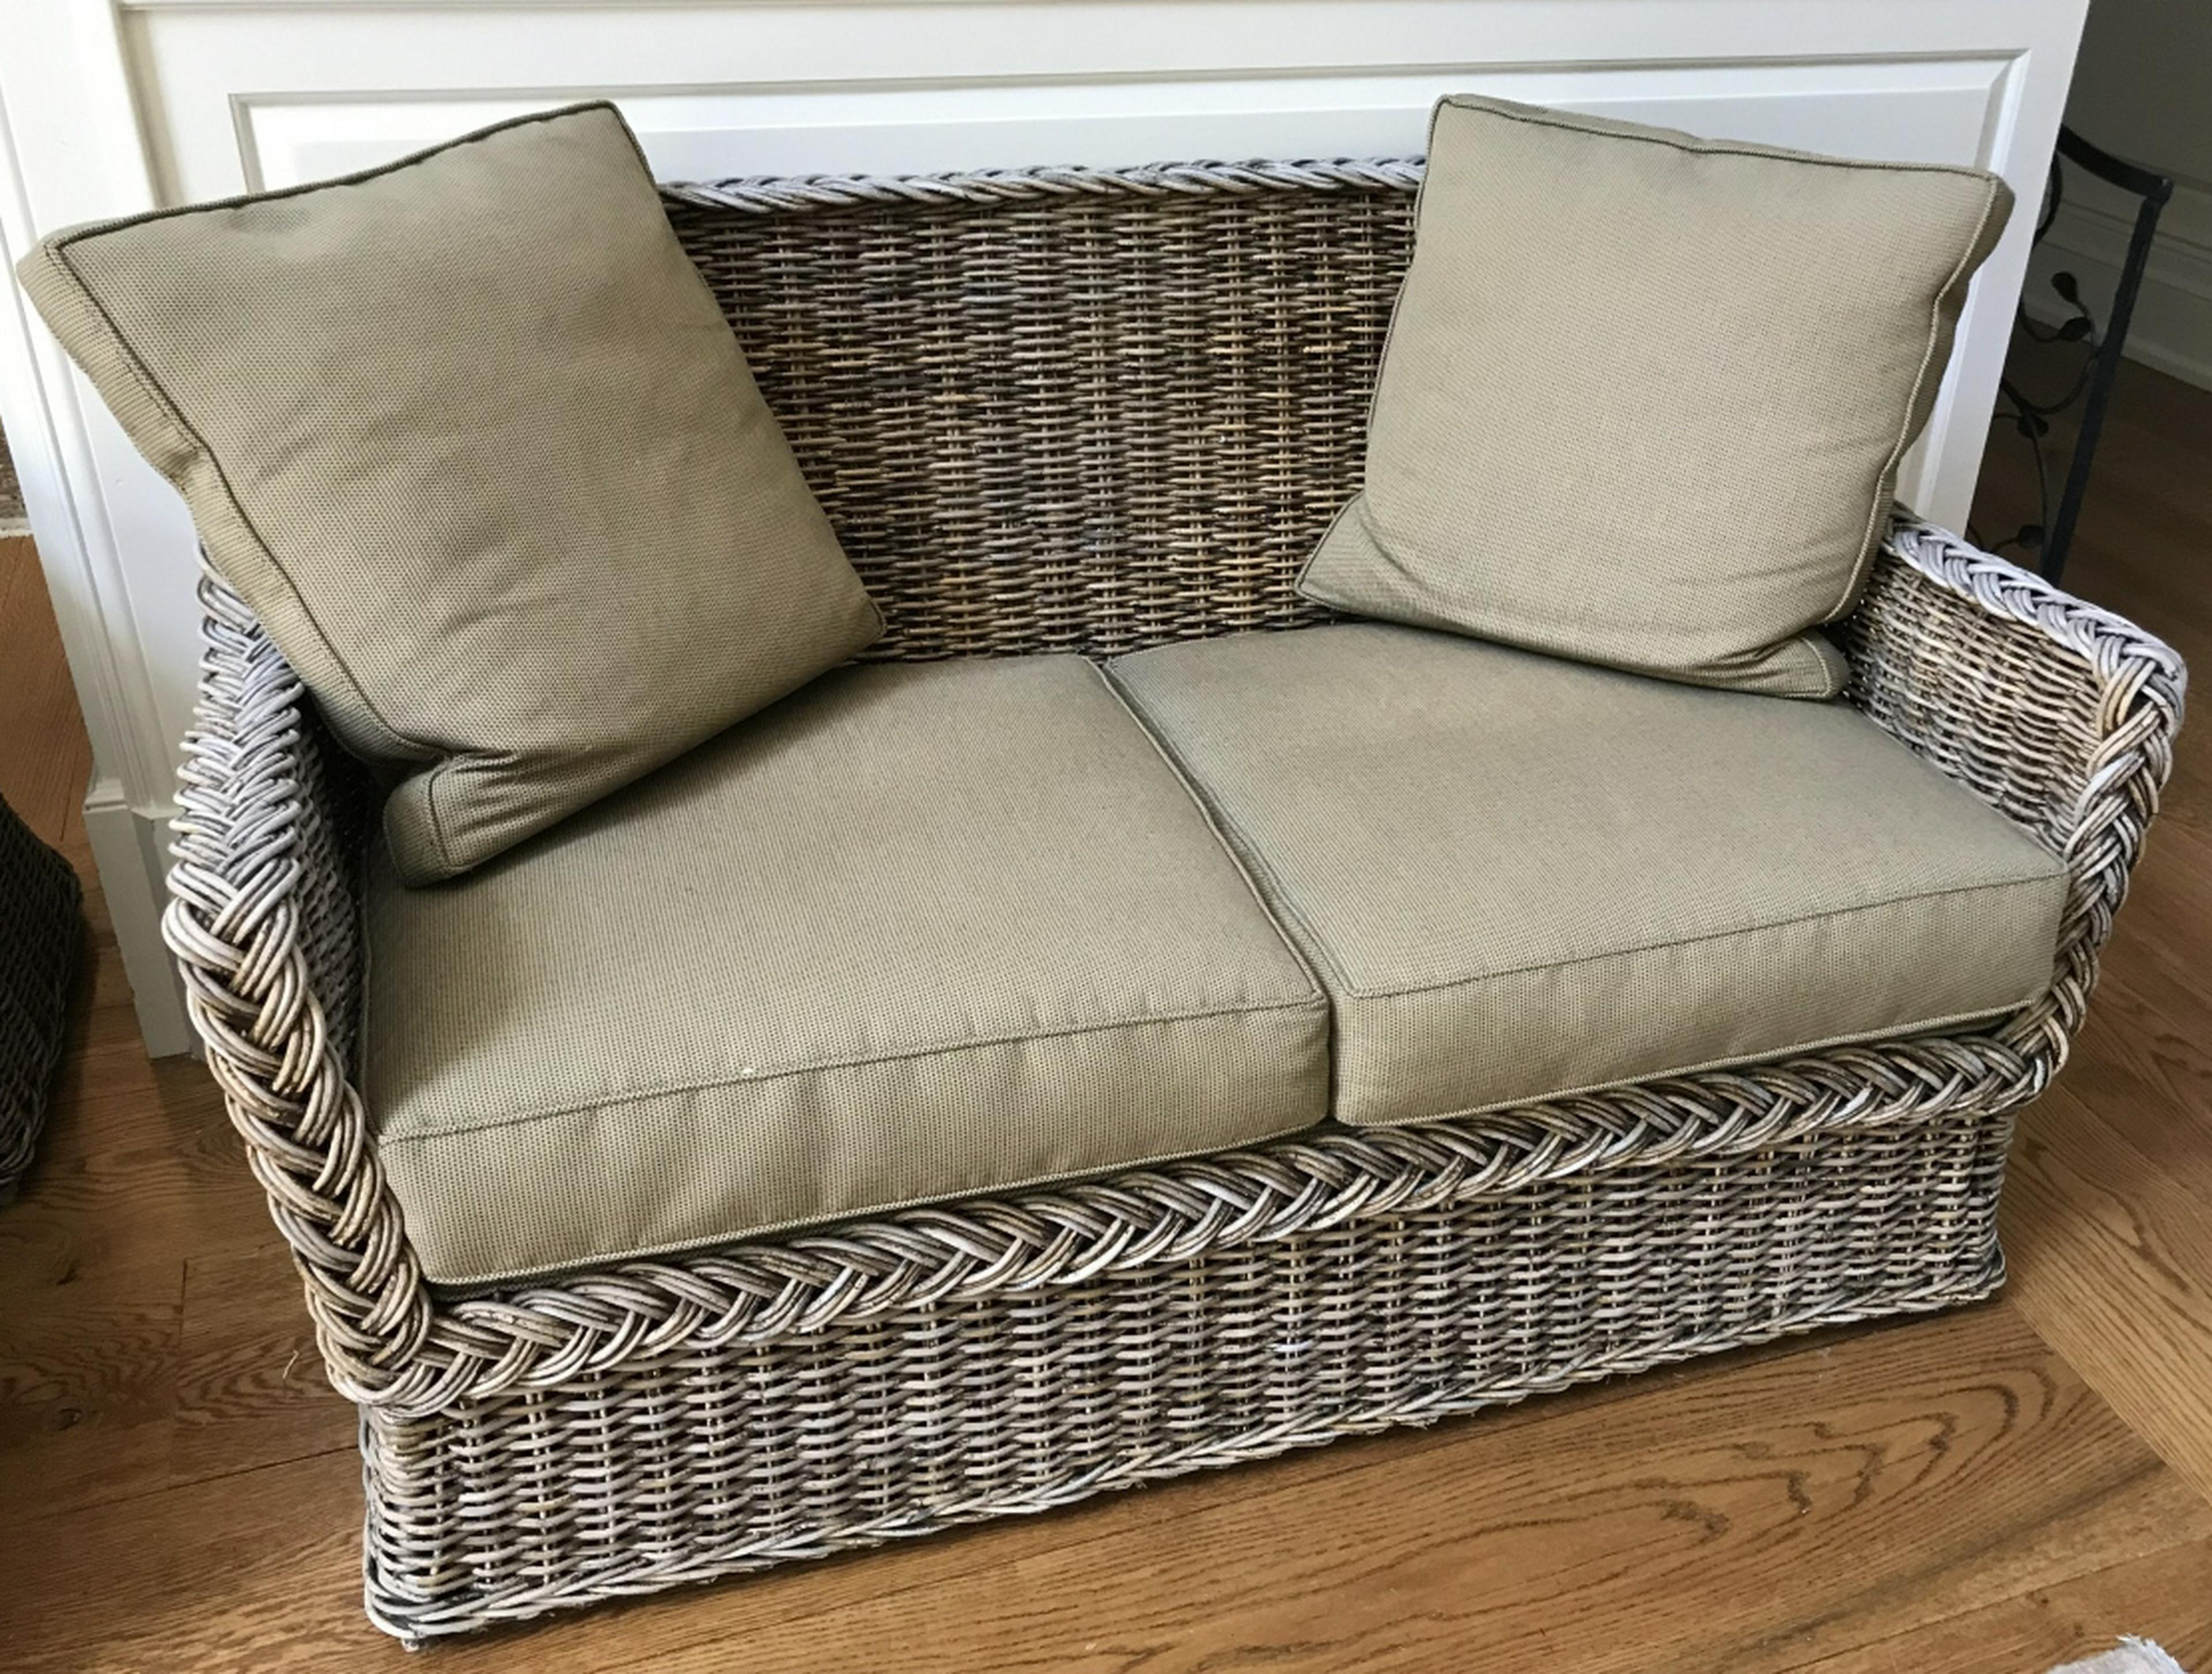 Contemporary wicker sofa with cushions. Great for garden patio or porch.
Rattan, stick wicker.